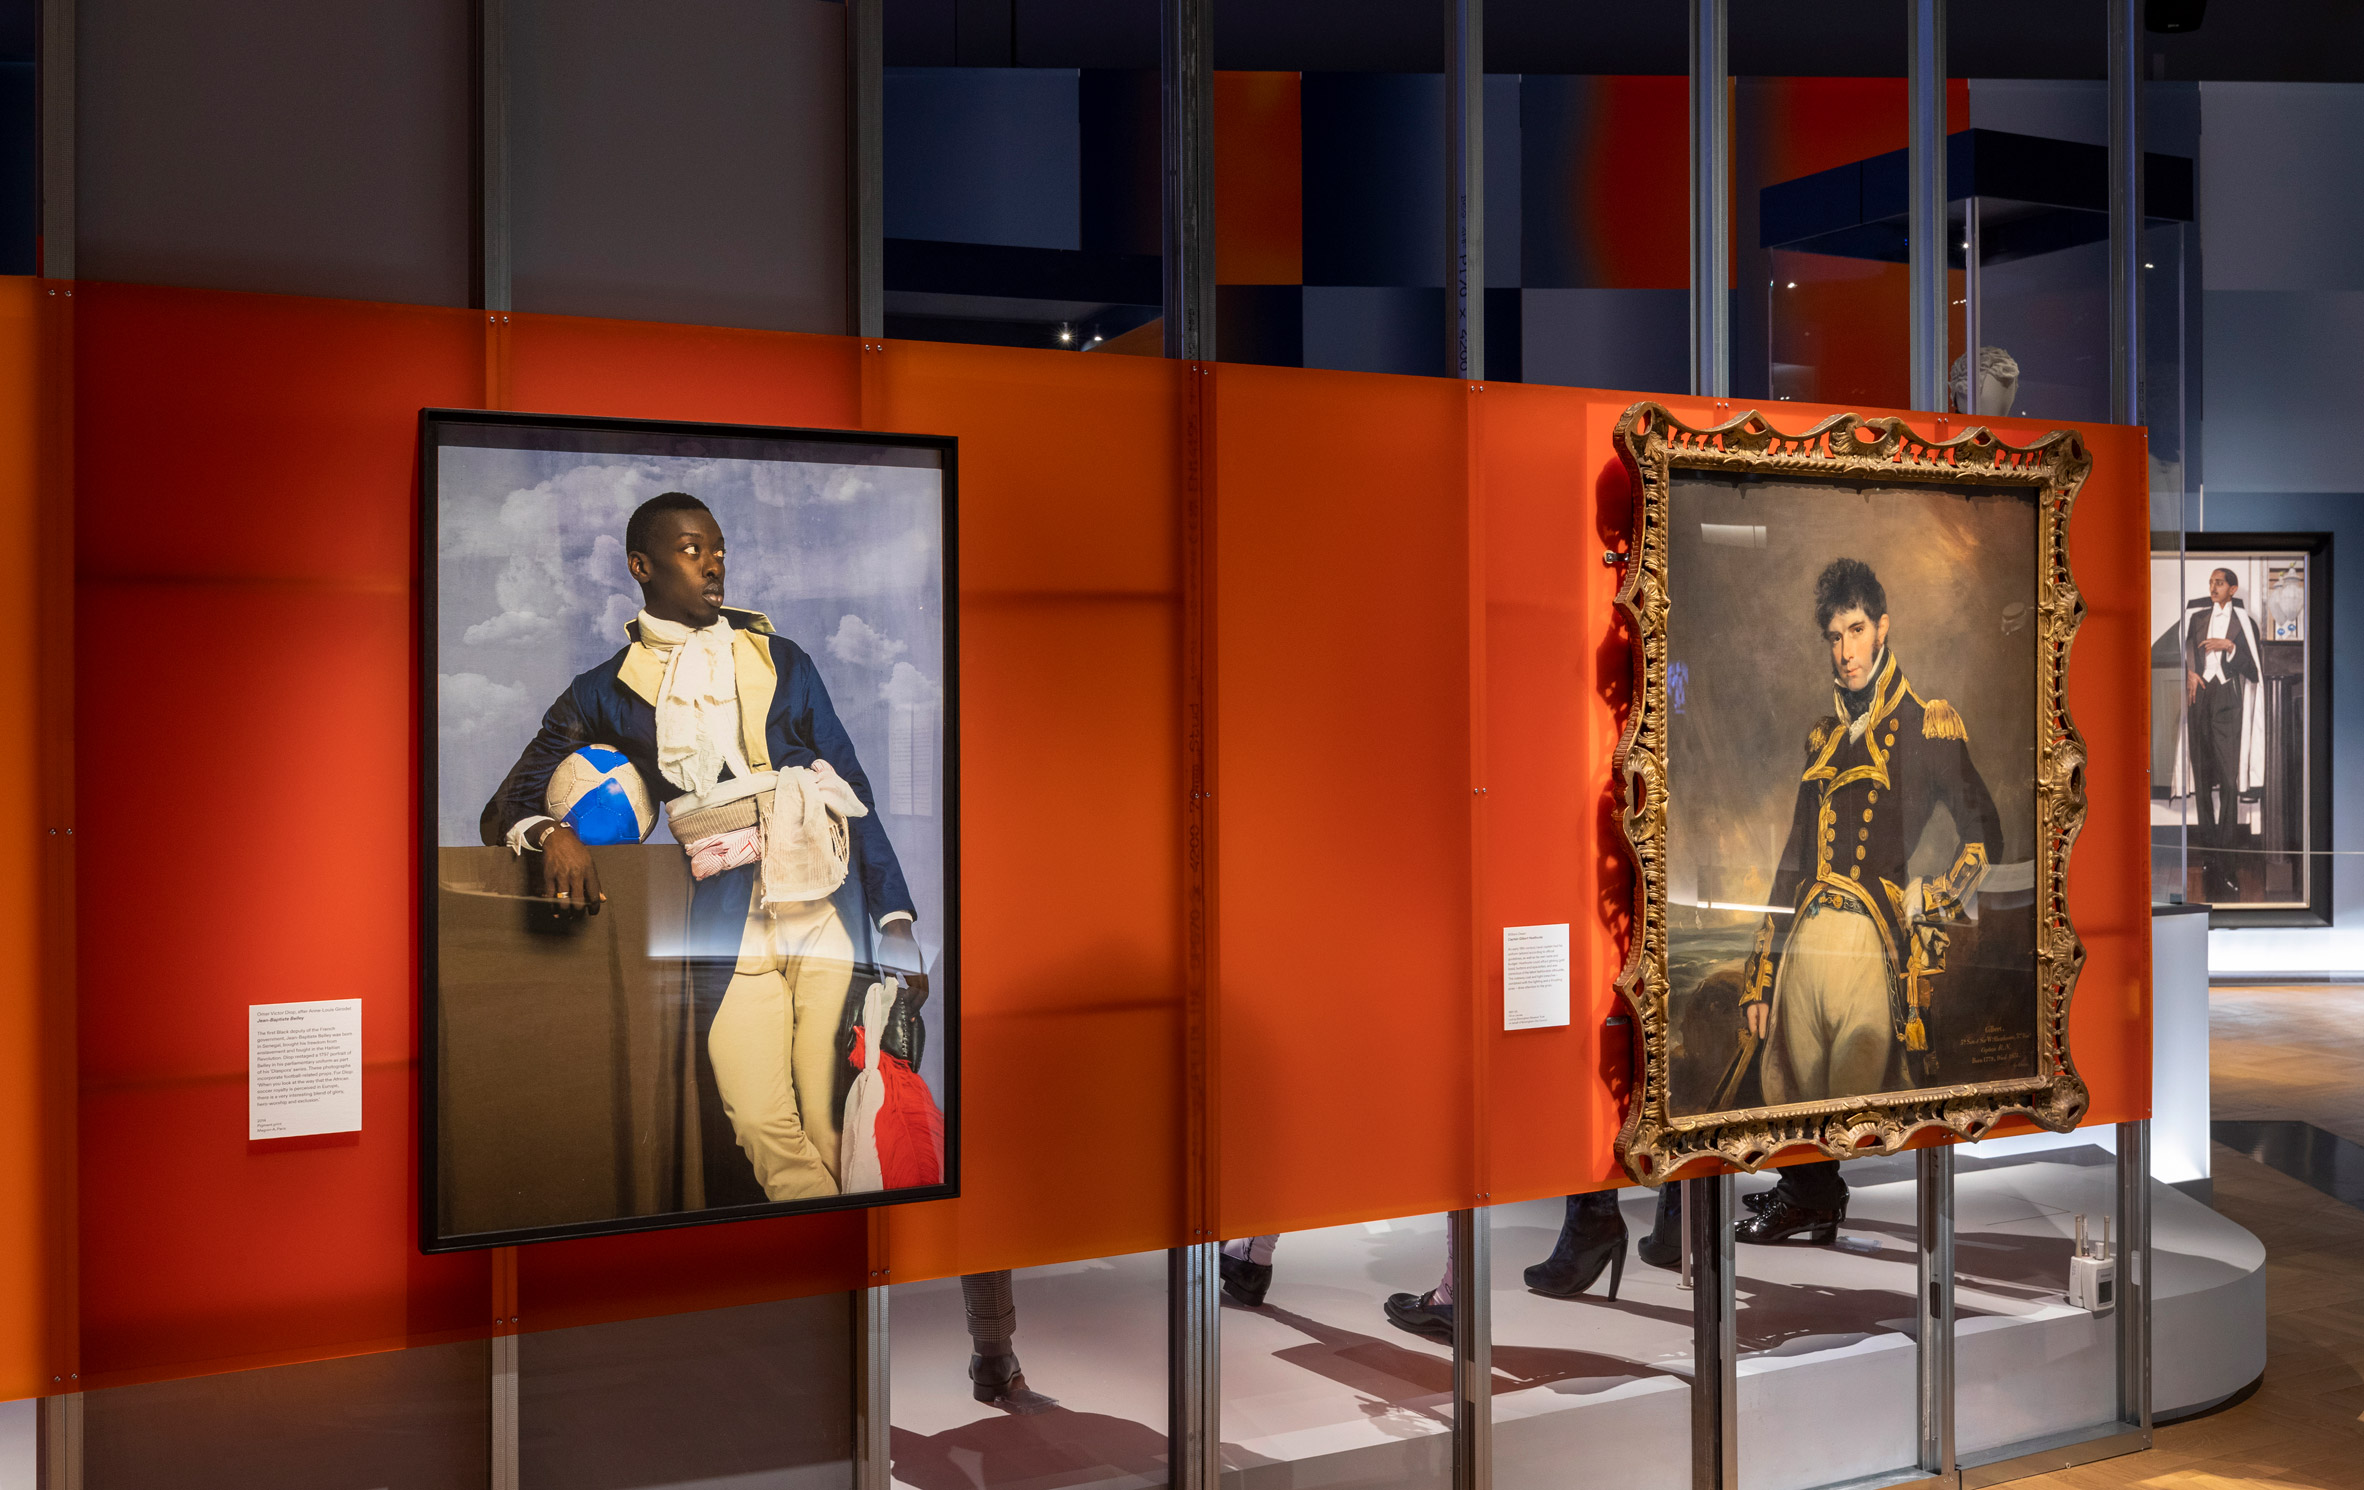 JA Projects designs Fashioning Masculinities exhibition at the V&A